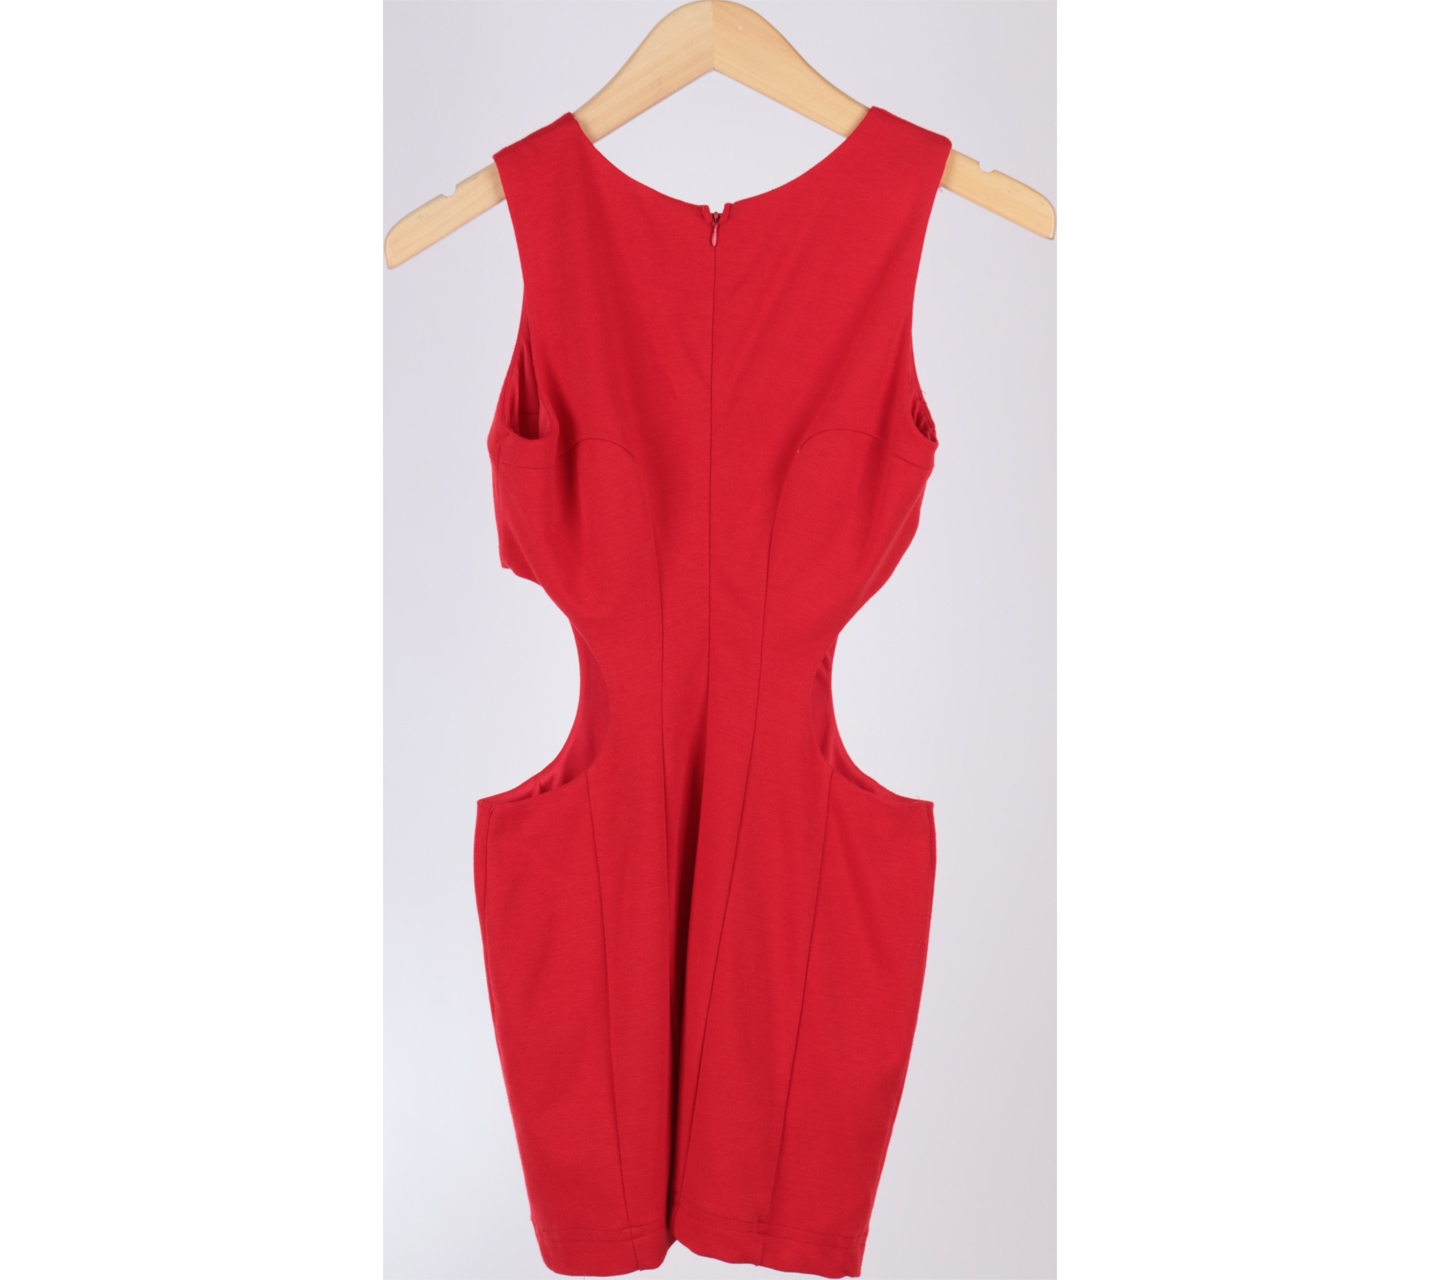 Ark & Co Red Cut Out Mini Dress